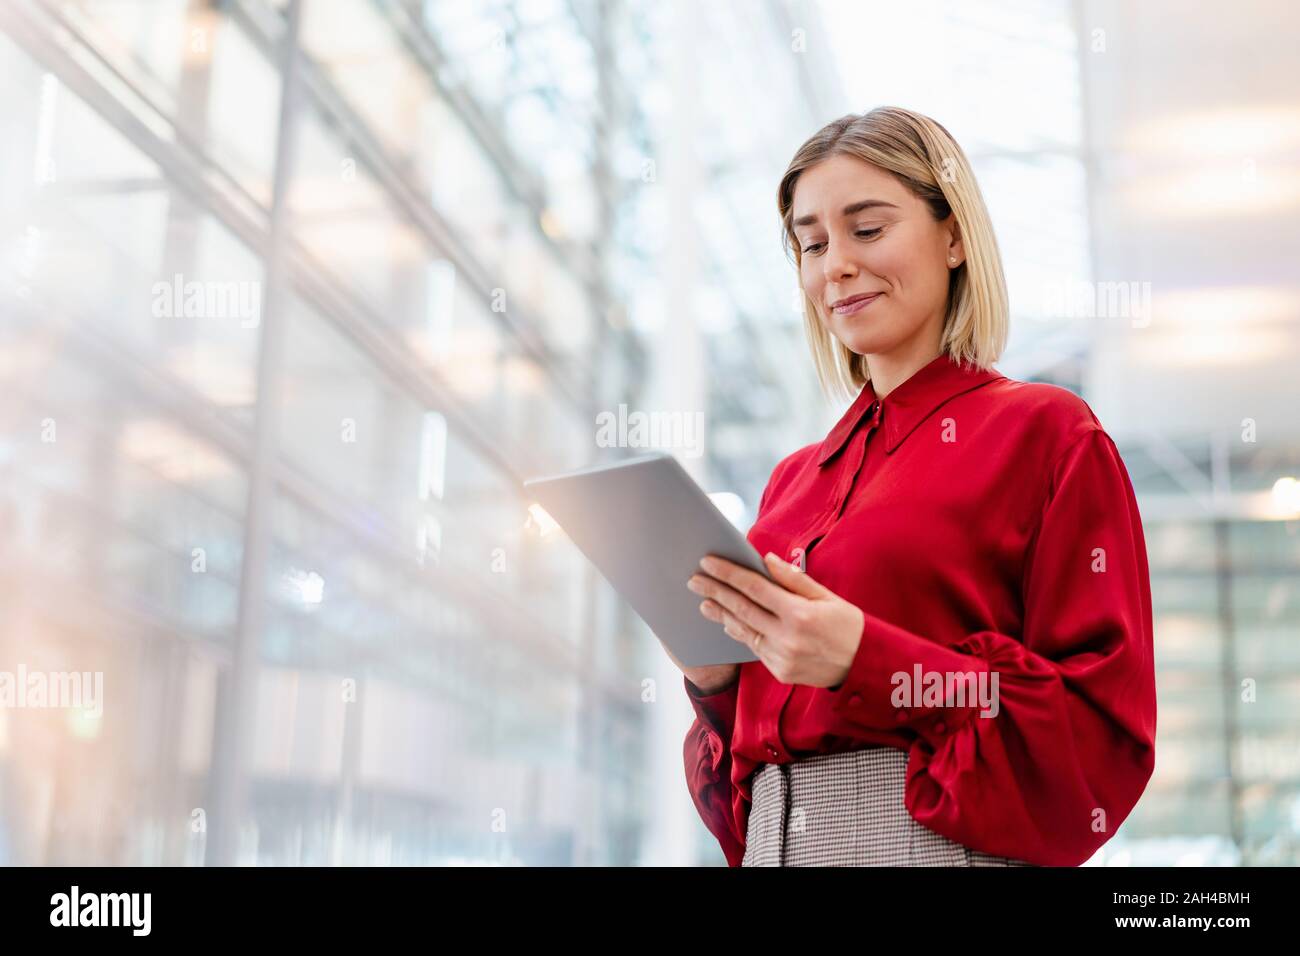 Young businesswoman wearing red shirt using tablet Stock Photo